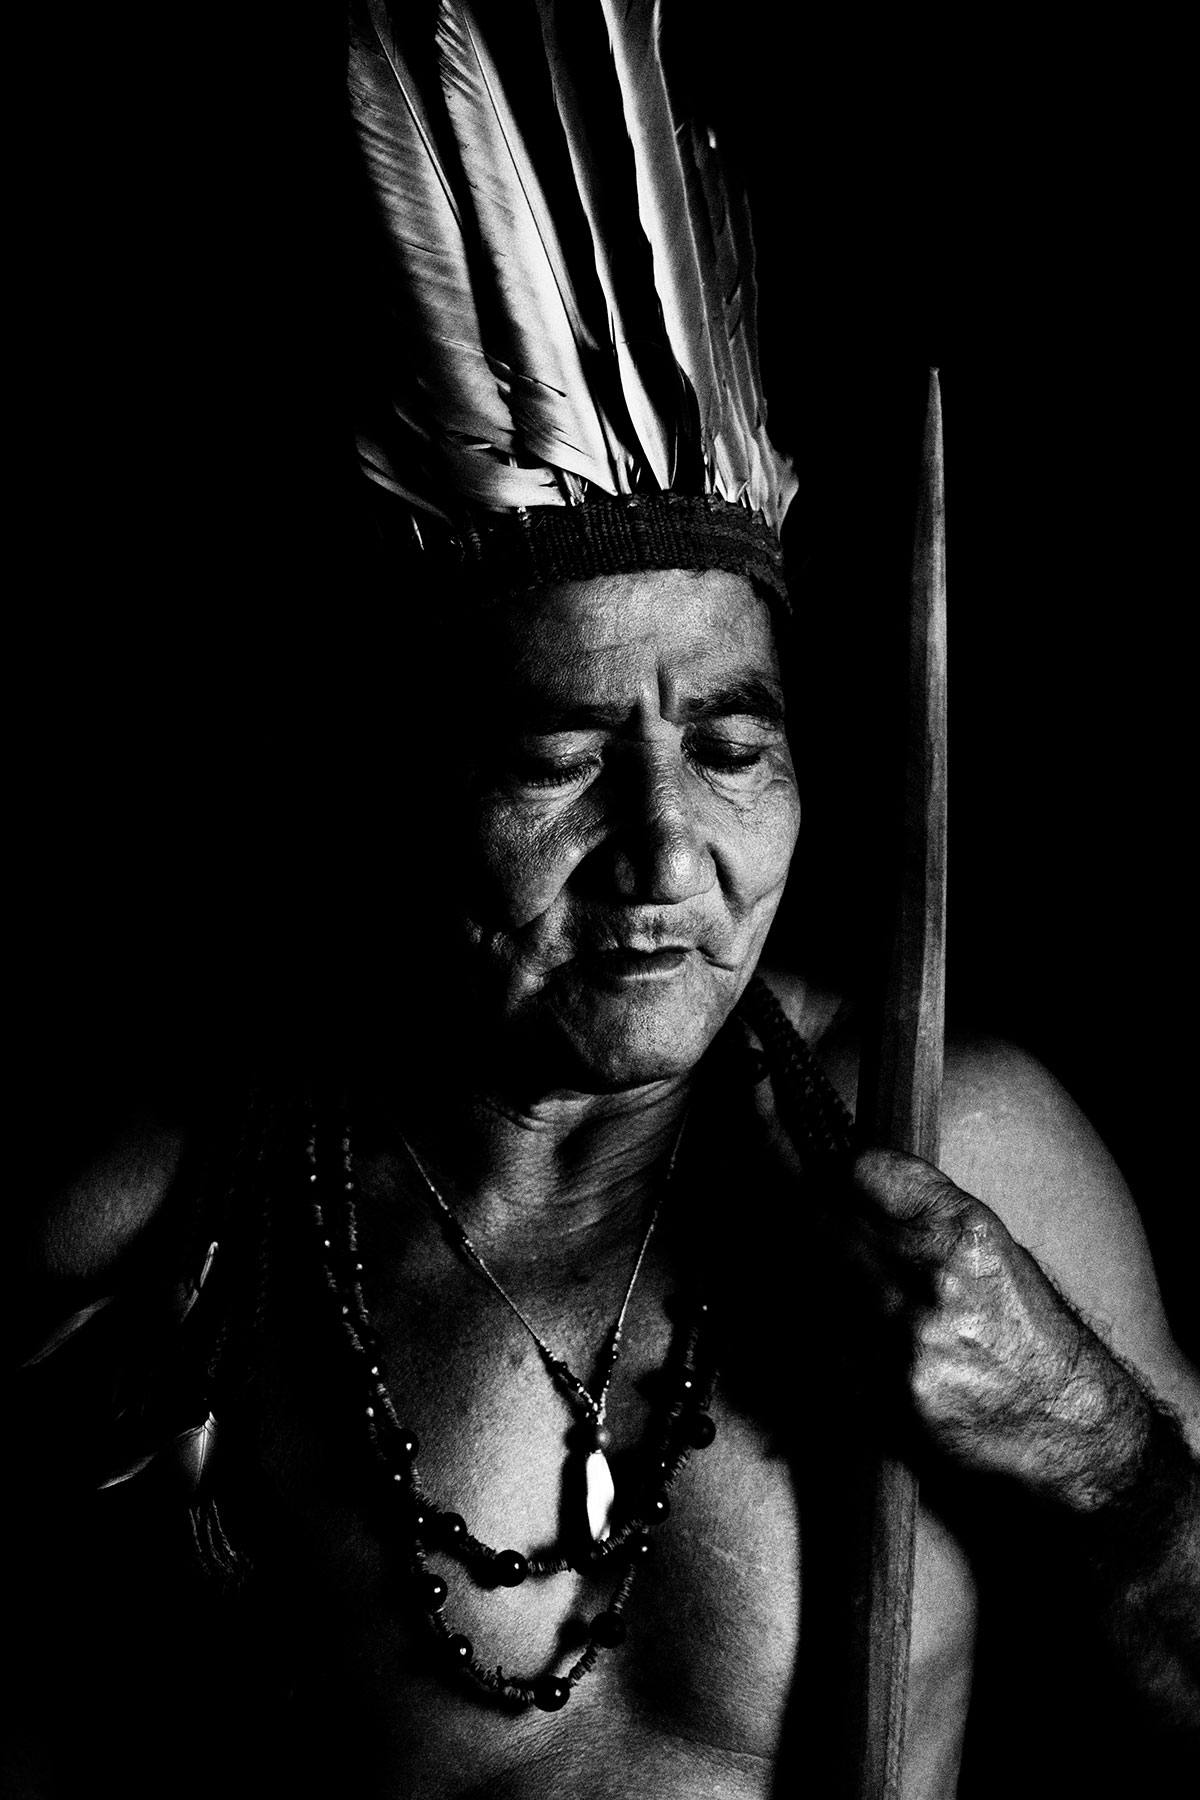 Eyes Closed Portrait of a Guajajara: Black and White Portrait Photography by Jean Tran and Élysée Lang